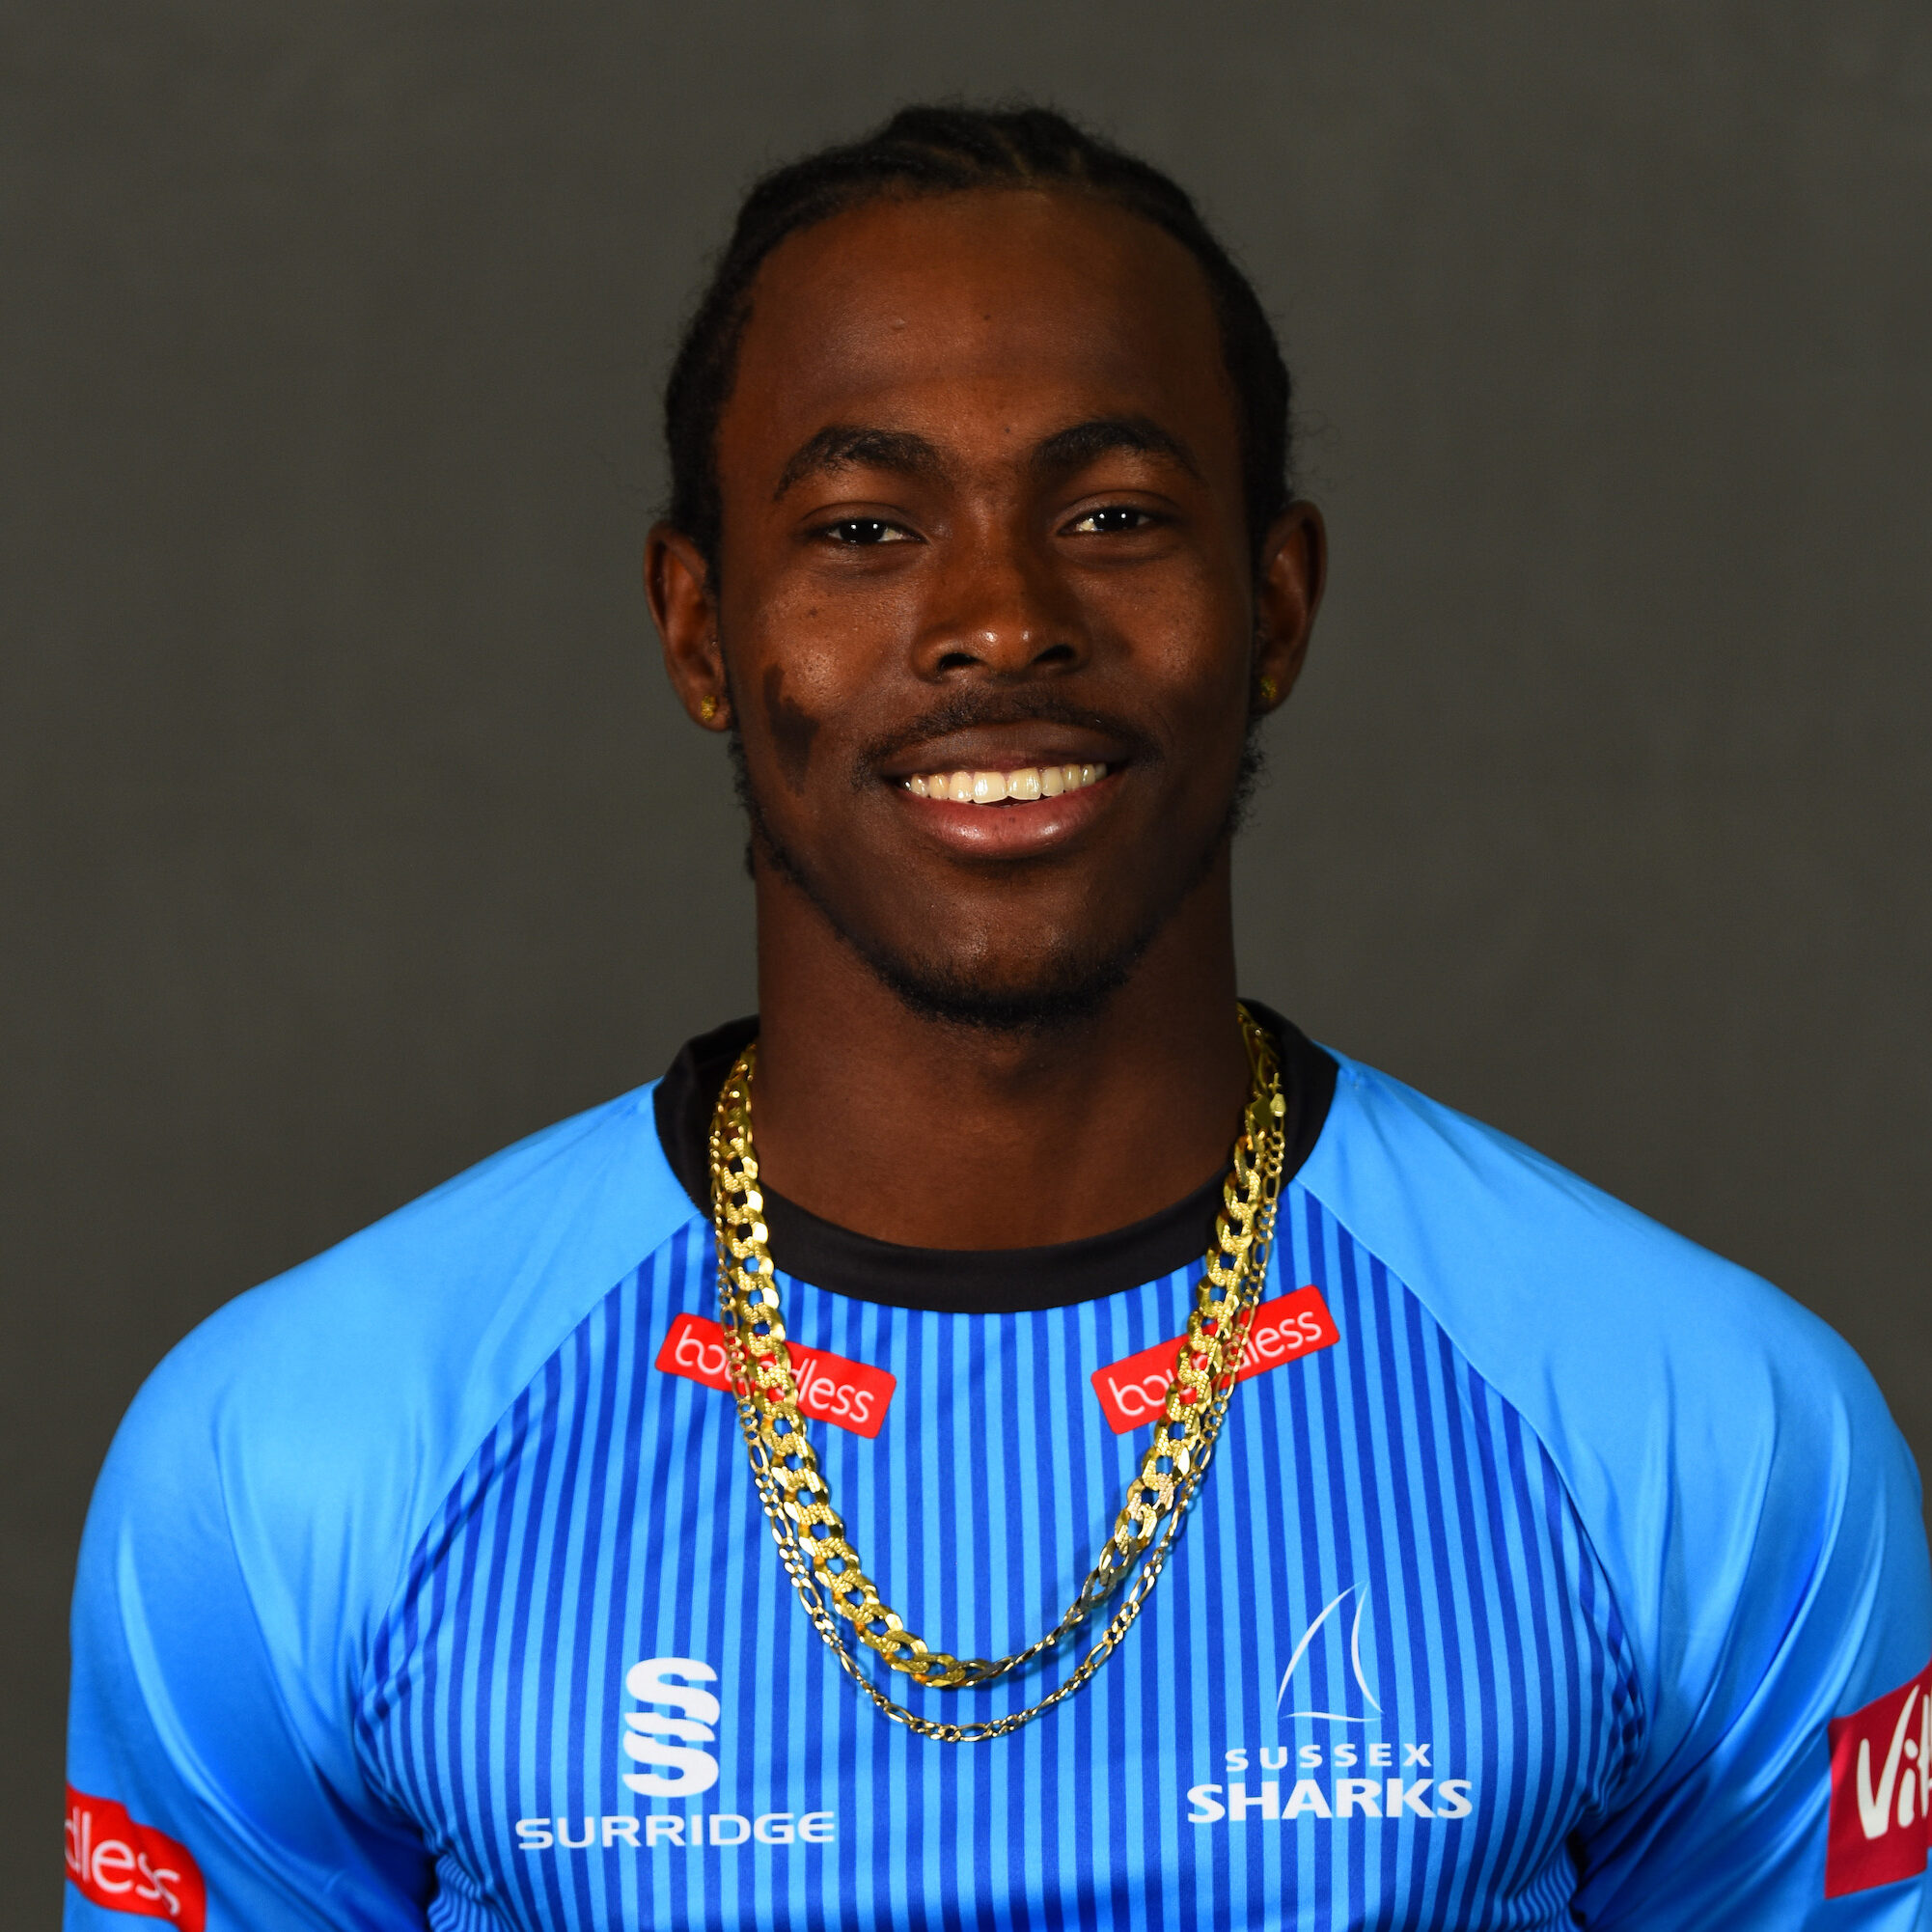 HOVE, ENGLAND - MARCH 28:  Jofra Archer of Sussex poses for a portrait in the Vitality Blast T20 kit during a Sussex CCC photocall at The 1st Central County Ground on March 28, 2018 in Hove, England.  (Photo by Mike Hewitt/Getty Images)